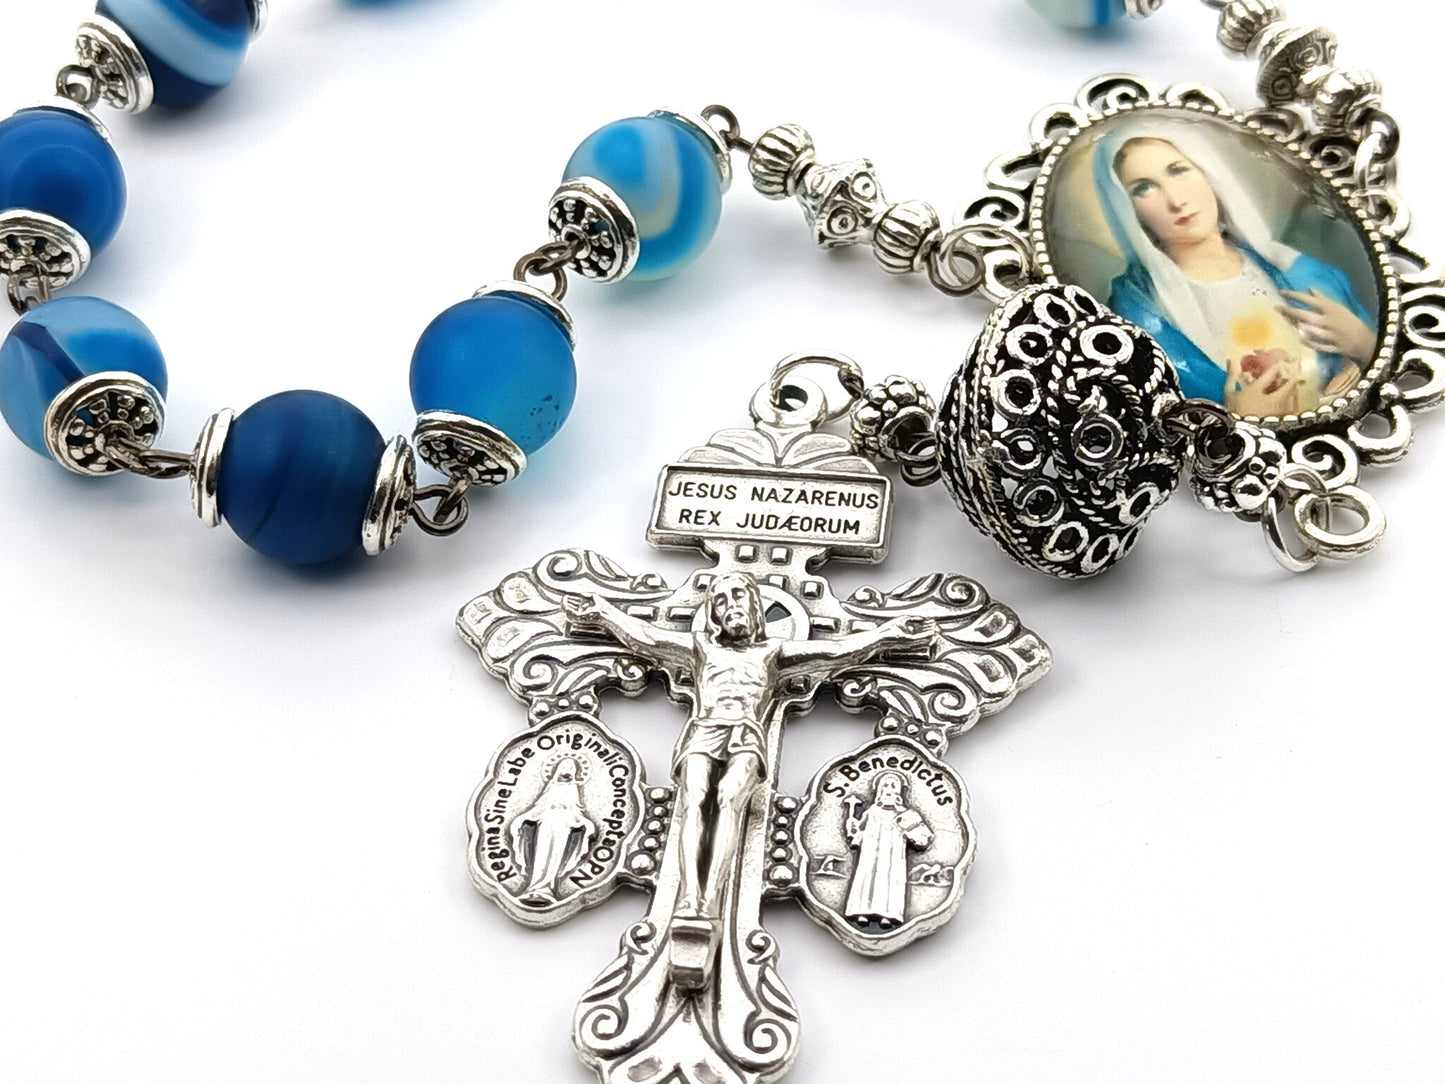 Immaculate Heart of Mary unique rosary beads single decade rosary with blue agate gemstone beads, silver Pardon crucifix, pater bead, bead caps and picture centre medal.